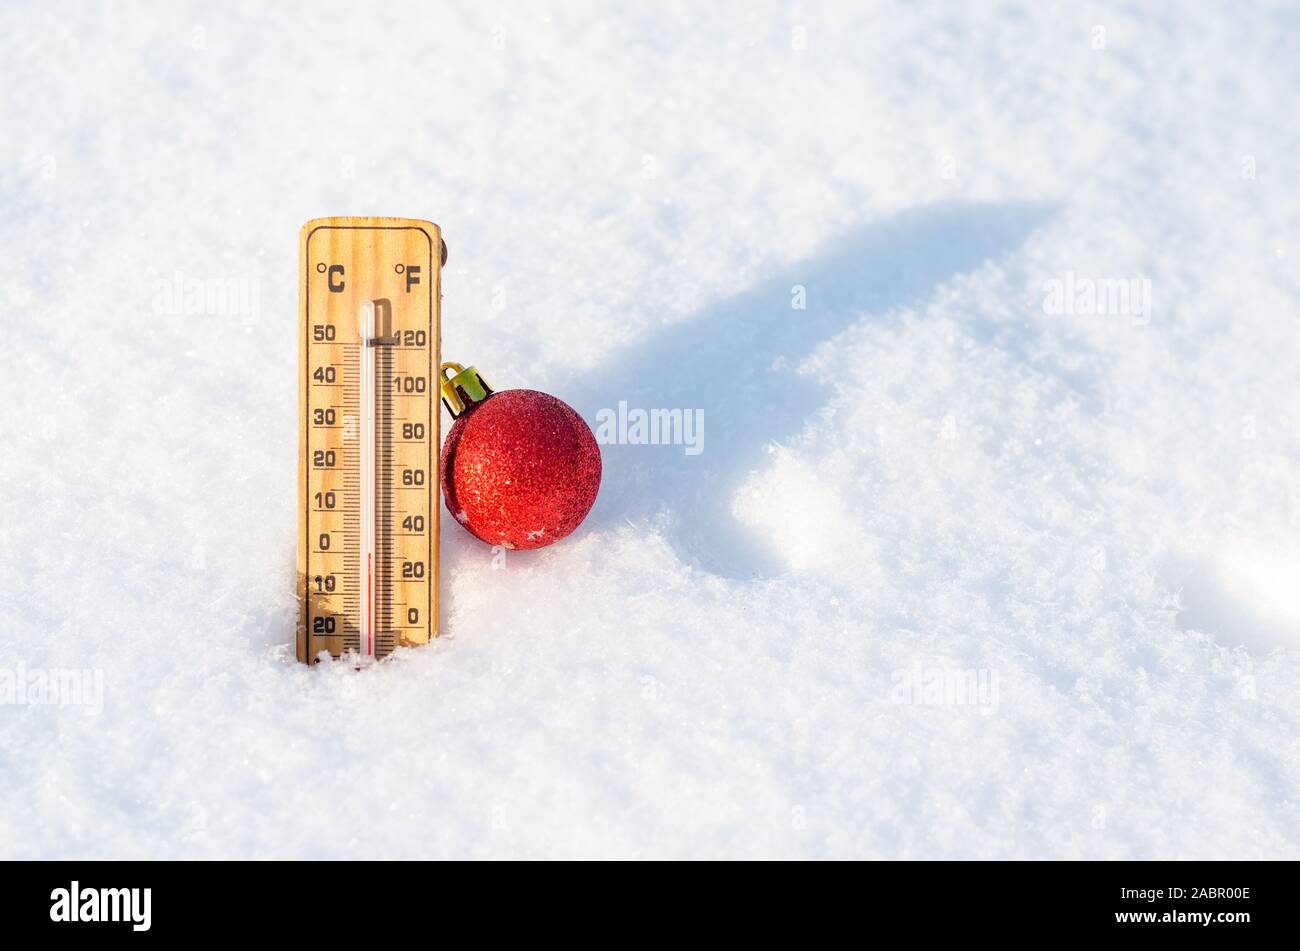 Thermometer in snow indicating temperature 0 degrees .Christmas Ball Ornaments Stock Photo